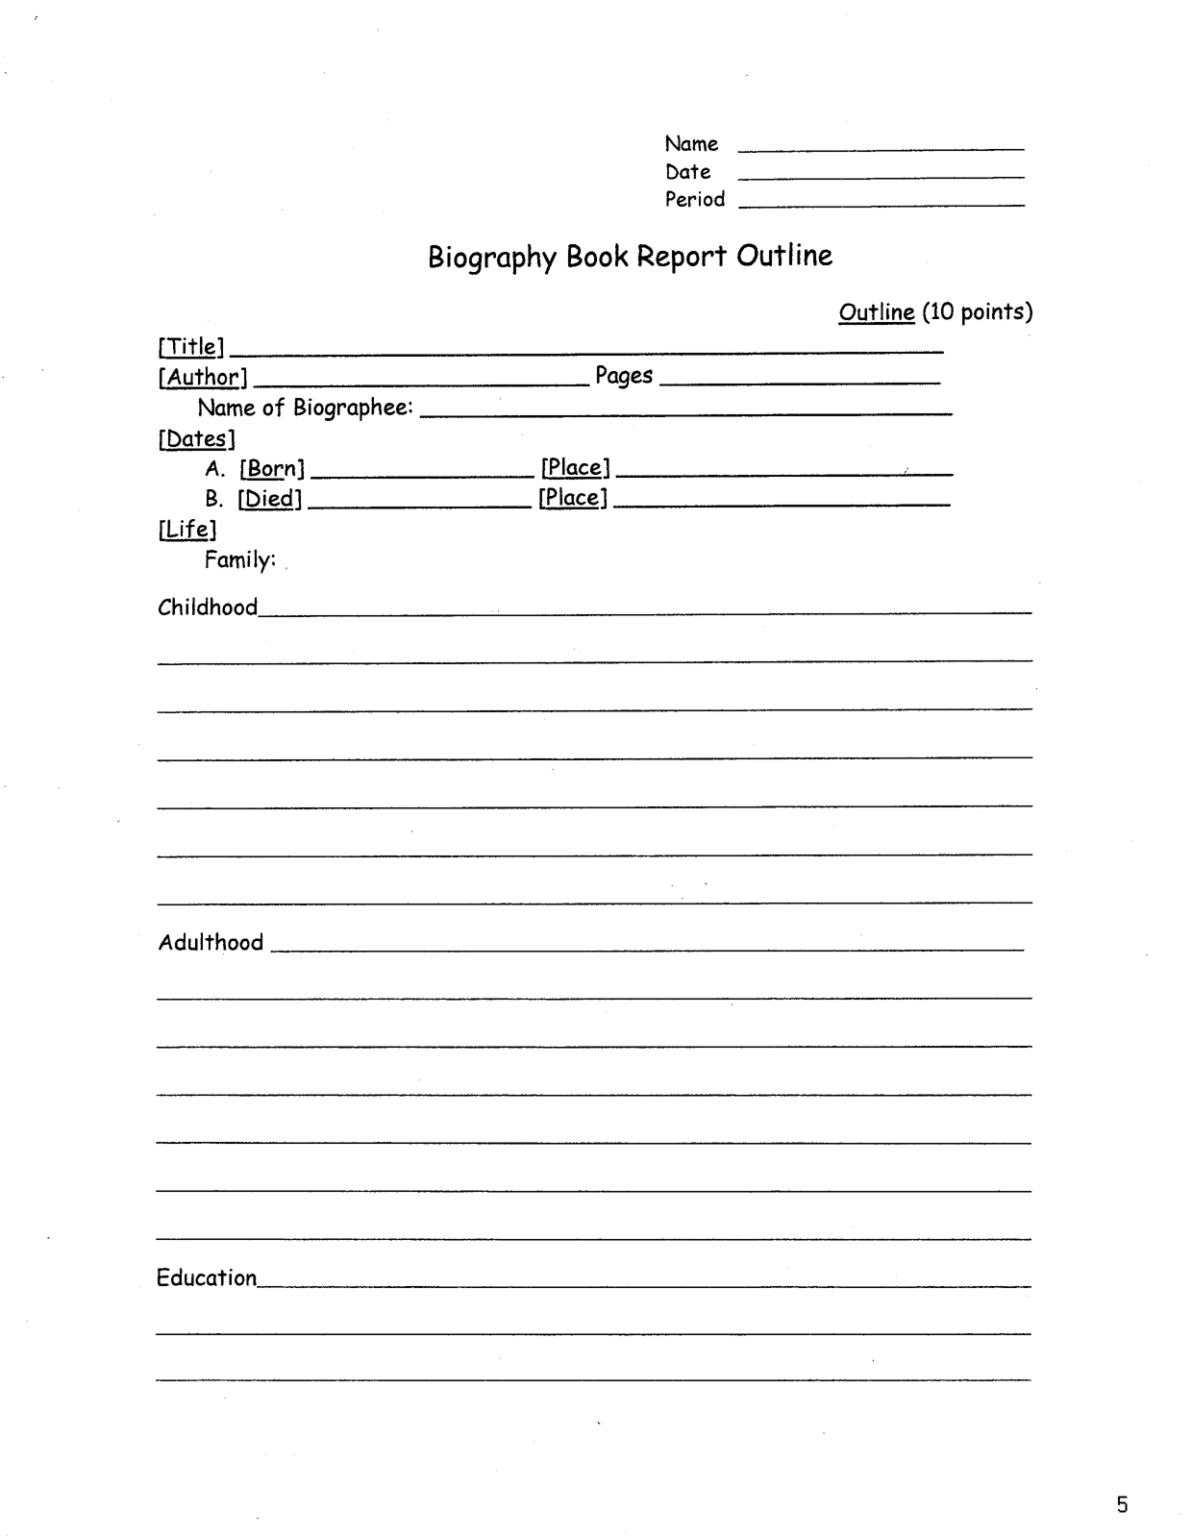 013 Biography Book Report Template Ideas Outline 83330 with Book Report